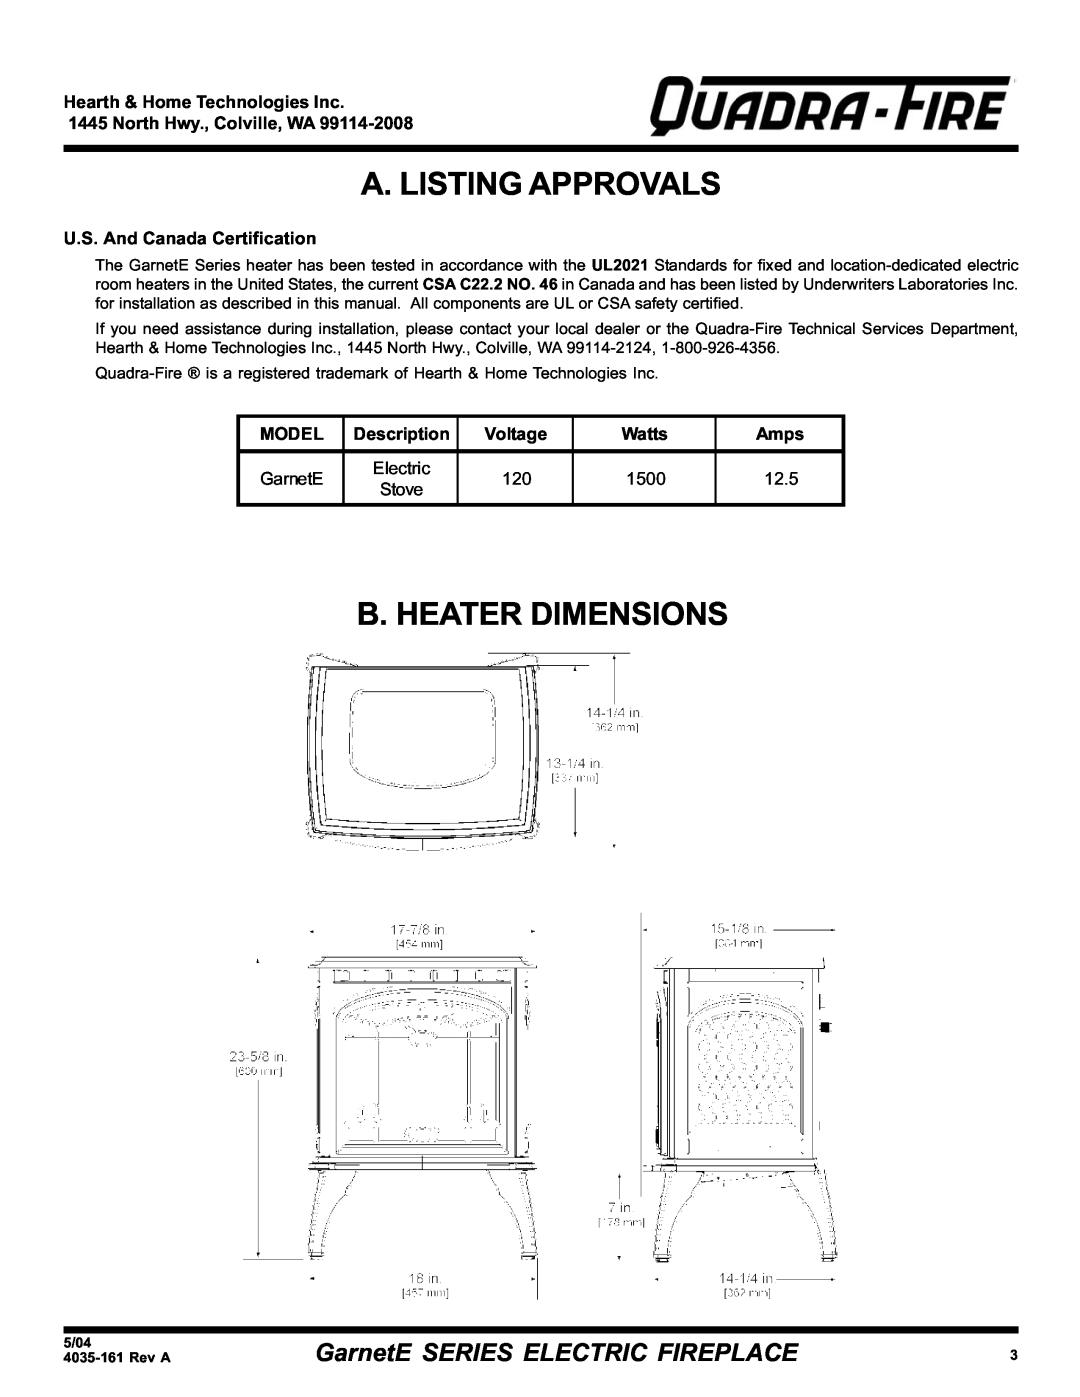 Hearth and Home Technologies warranty A. Listing Approvals, B. Heater Dimensions, GarnetE SERIES ELECTRIC FIREPLACE 